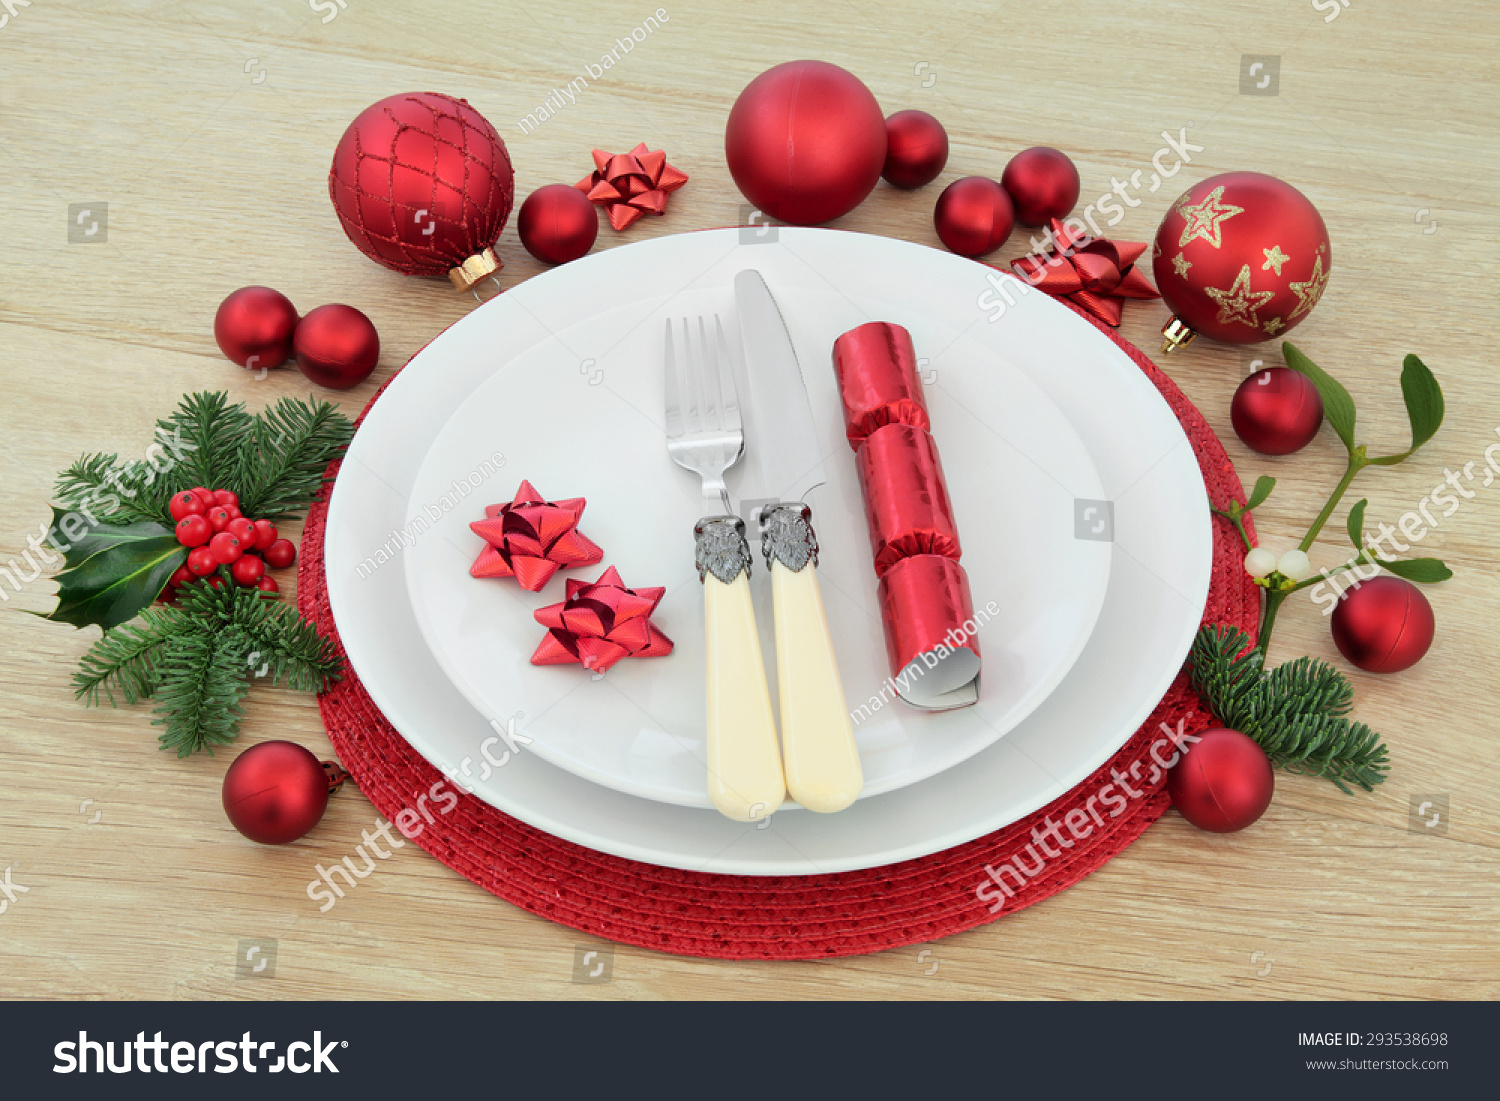 Christmas Dinner Place Setting With Plates, Antique Cutlery, Red ...